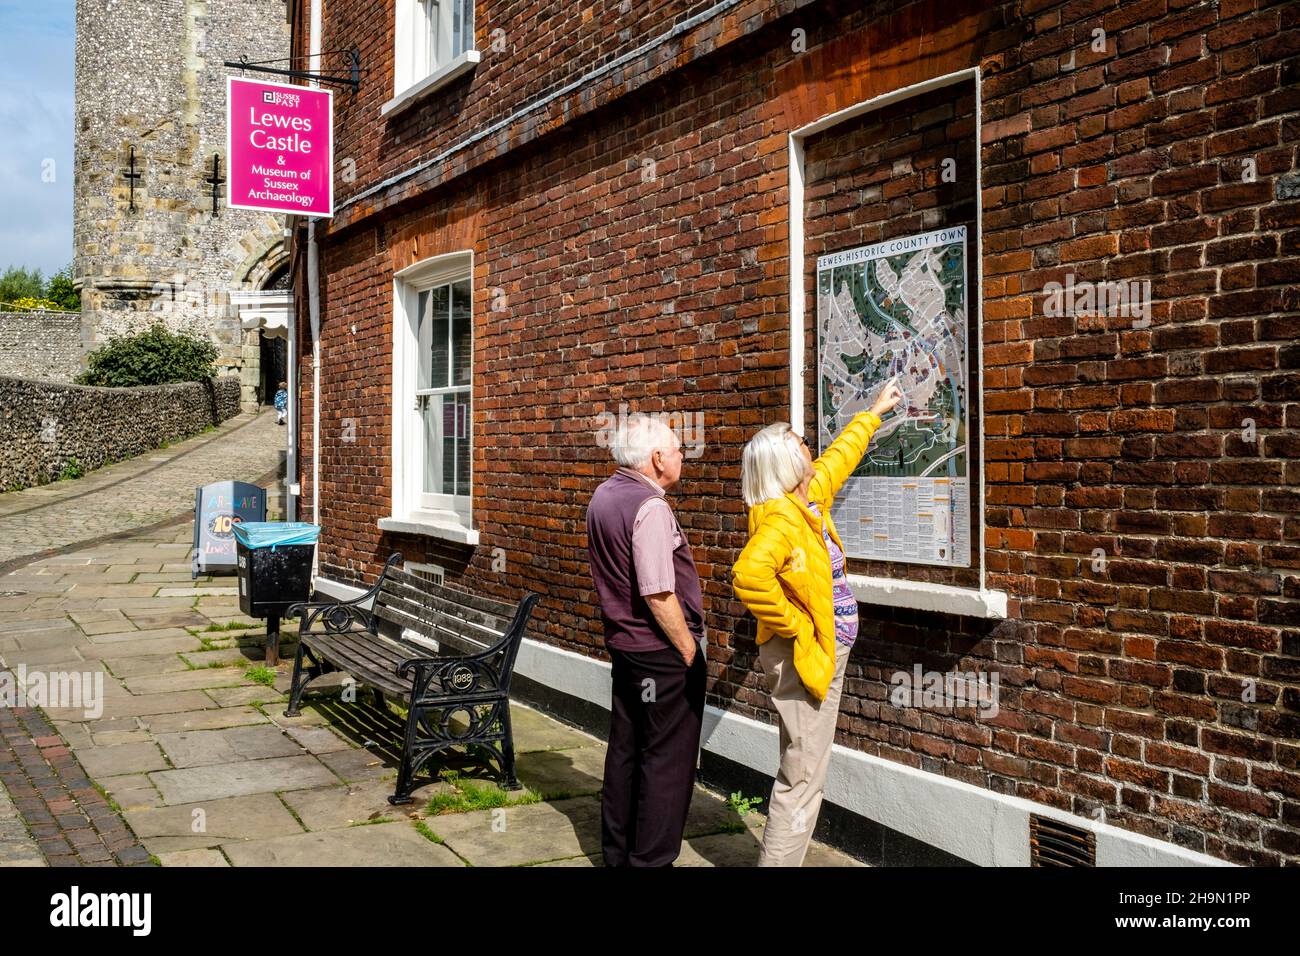 Visitors To Lewes Look At The Town Map Outside The Castle, Lewes, East Sussex, UK. Stock Photo